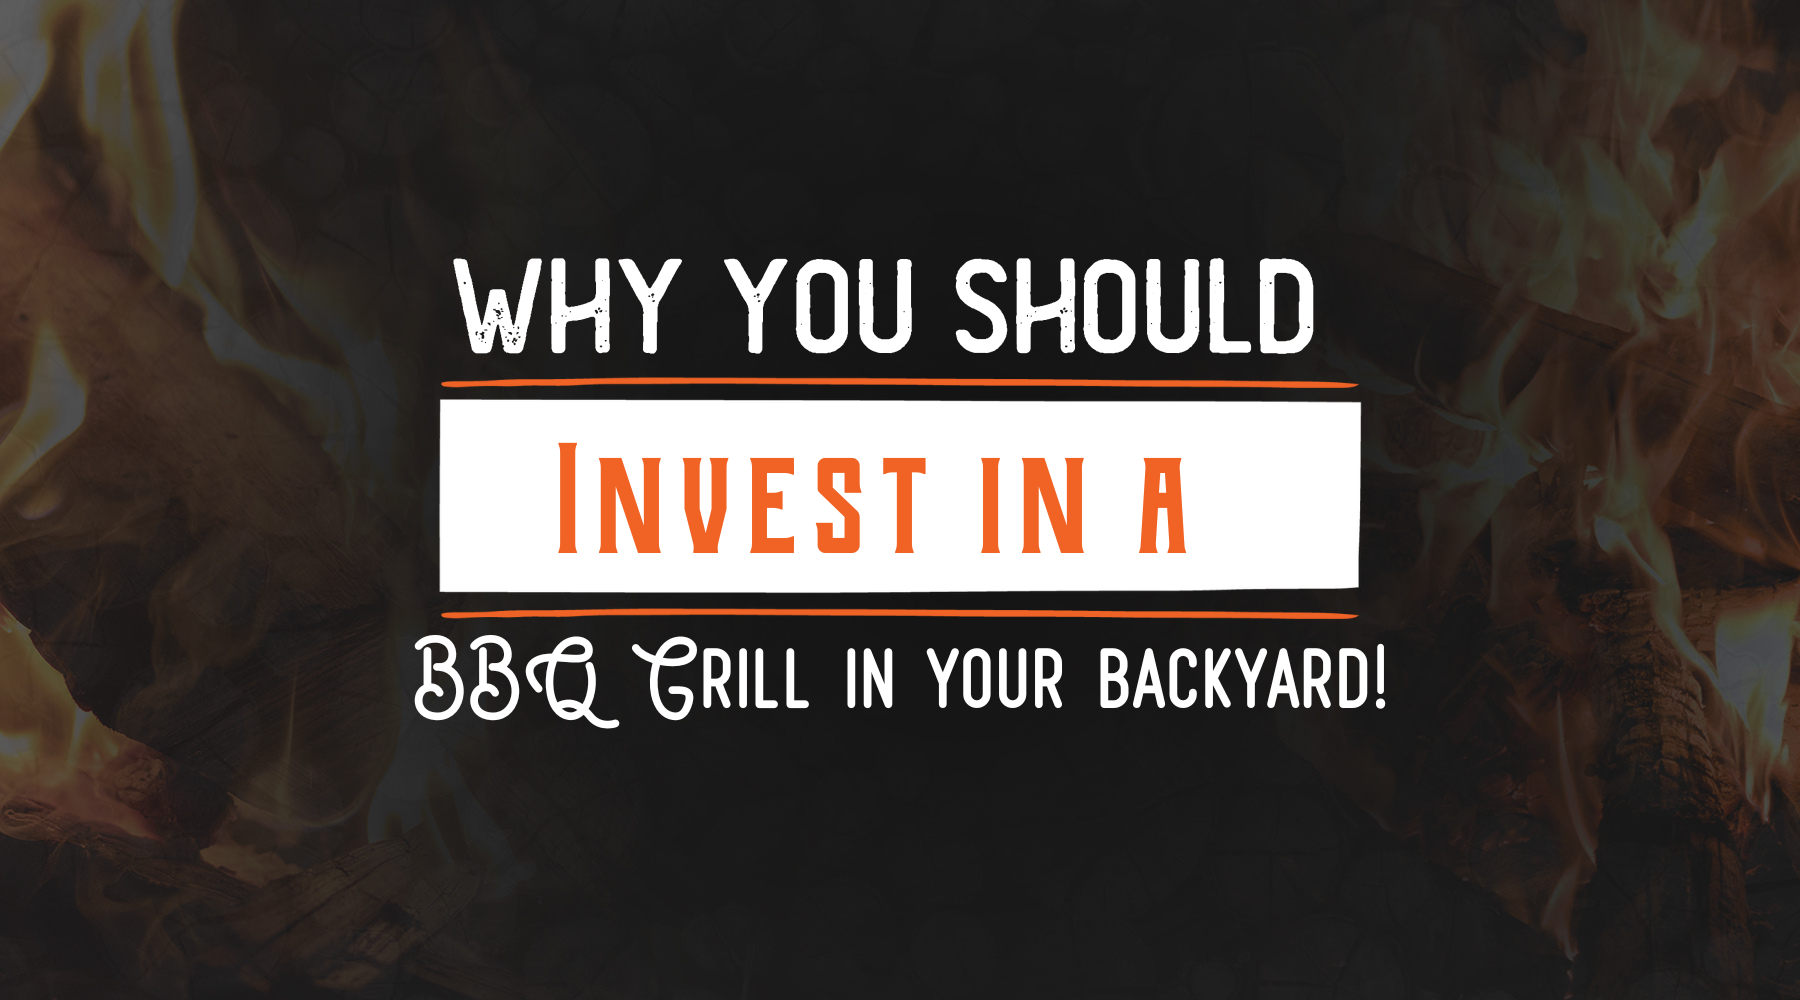 Why should you Invest in a Built-in Grill for your Backyard?